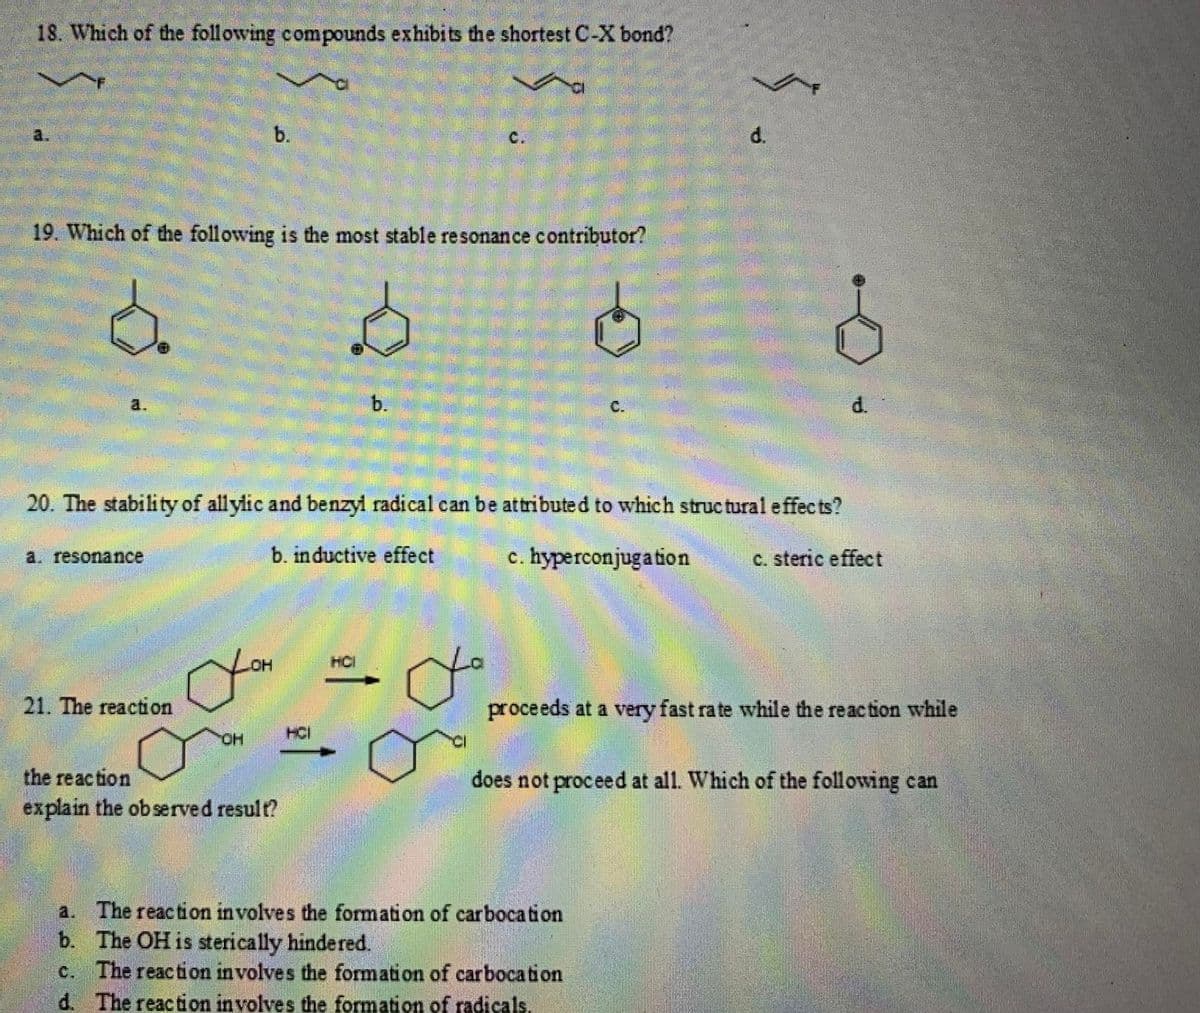 18. Which of the following compounds exhibits the shortest C-X bond?
b.
c.
d.
19. Which of the following is the most stable resonance contributor?
20. The stability of allylic and benzyl radical can be attributed to which struc tural effec ts?
a. resonance
b. inductive effect
c. hyperconjugation
c. steric effect
HO
HCI
21. The reaction
proceeds at a very fast rate while the reaction while
HO.
HCI
the reaction
explain the observed result?
does not proceed at all. Which of the following can
a. The reaction involves the formation of carboca tion
b. The OH is sterically hindered.
c. The reaction involves the formation of carbocation
d. The reaction involves the formation of radicals.
d.
